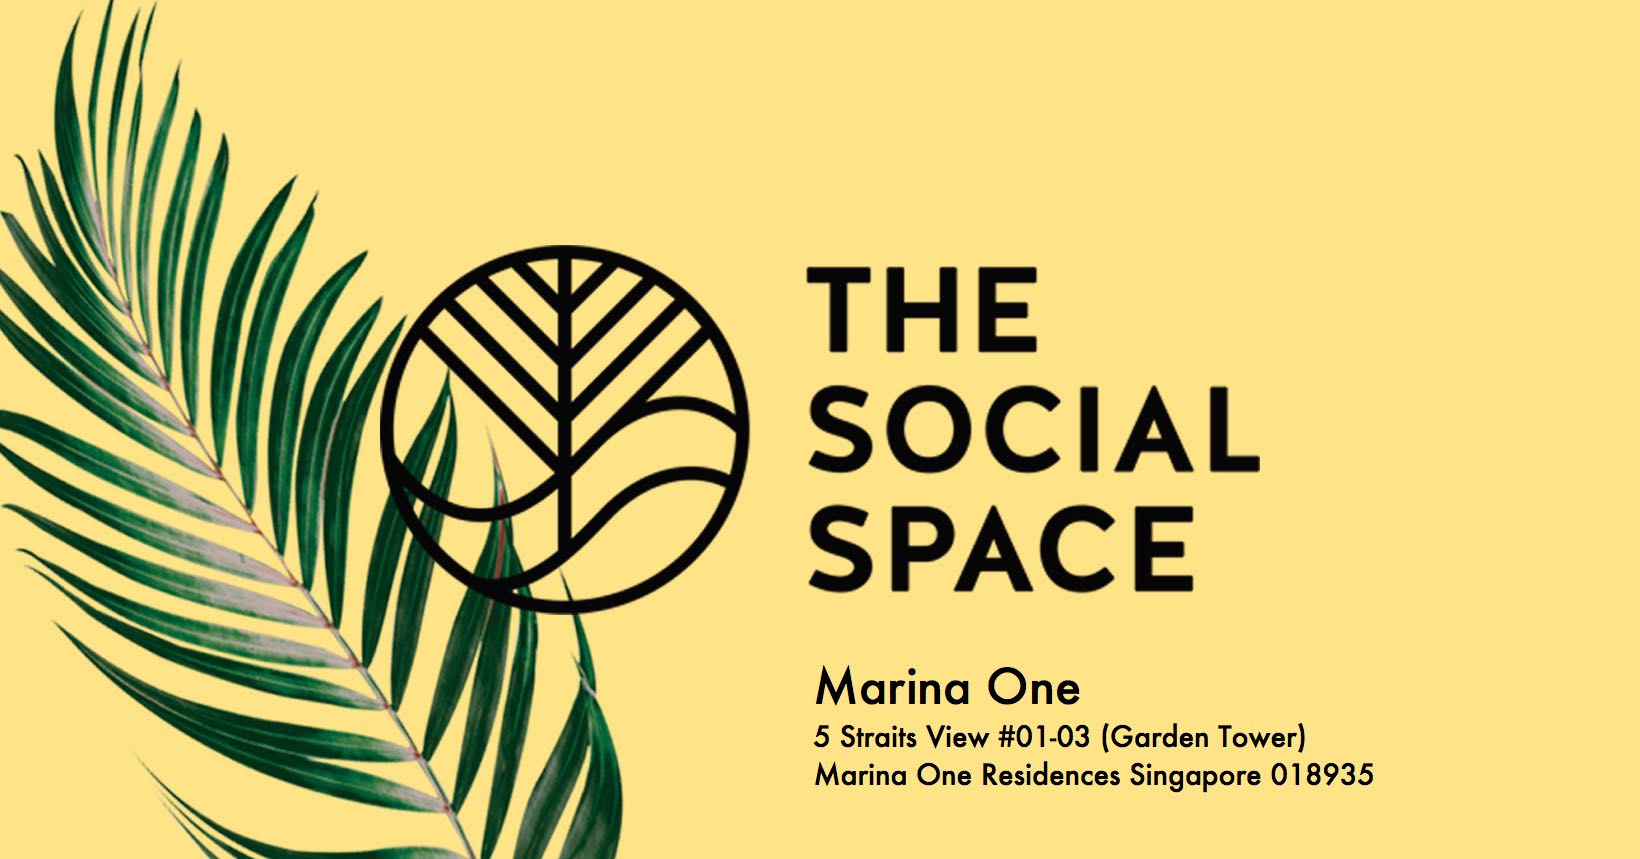 Indosole Slides, Slippers & Flip Flops at The Social Space Marina One